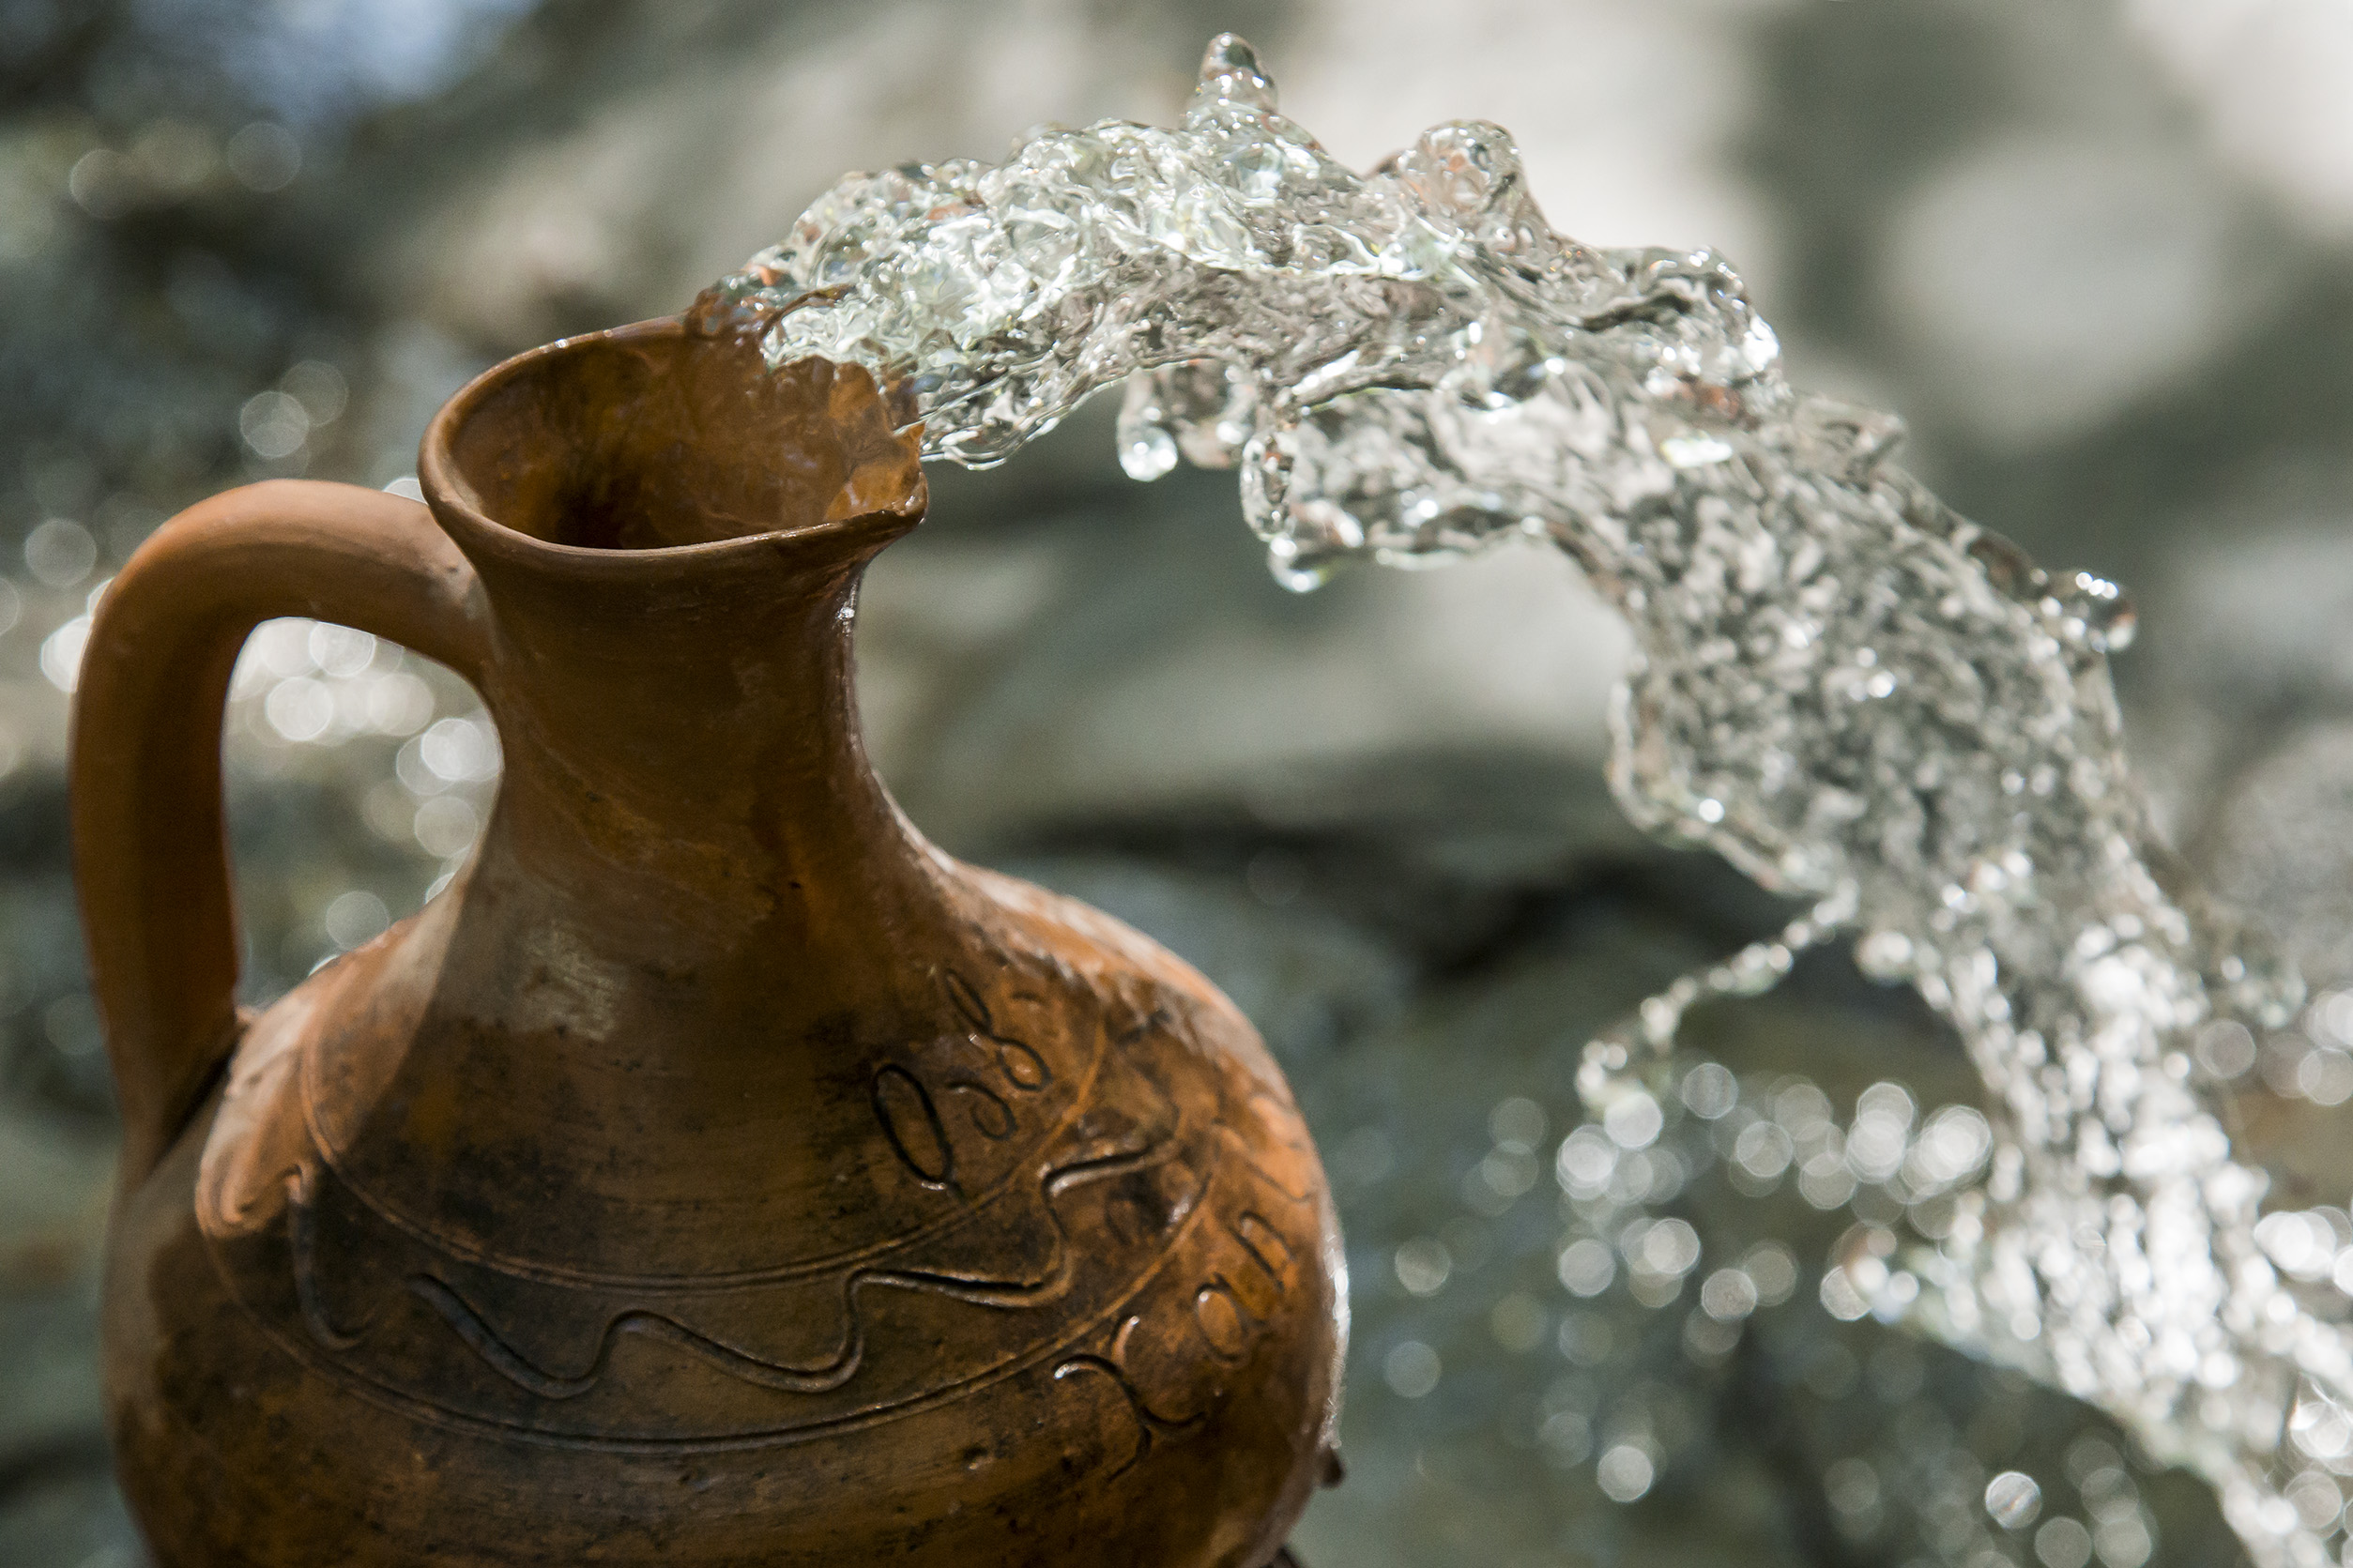 Water flows from a ceramic jug 